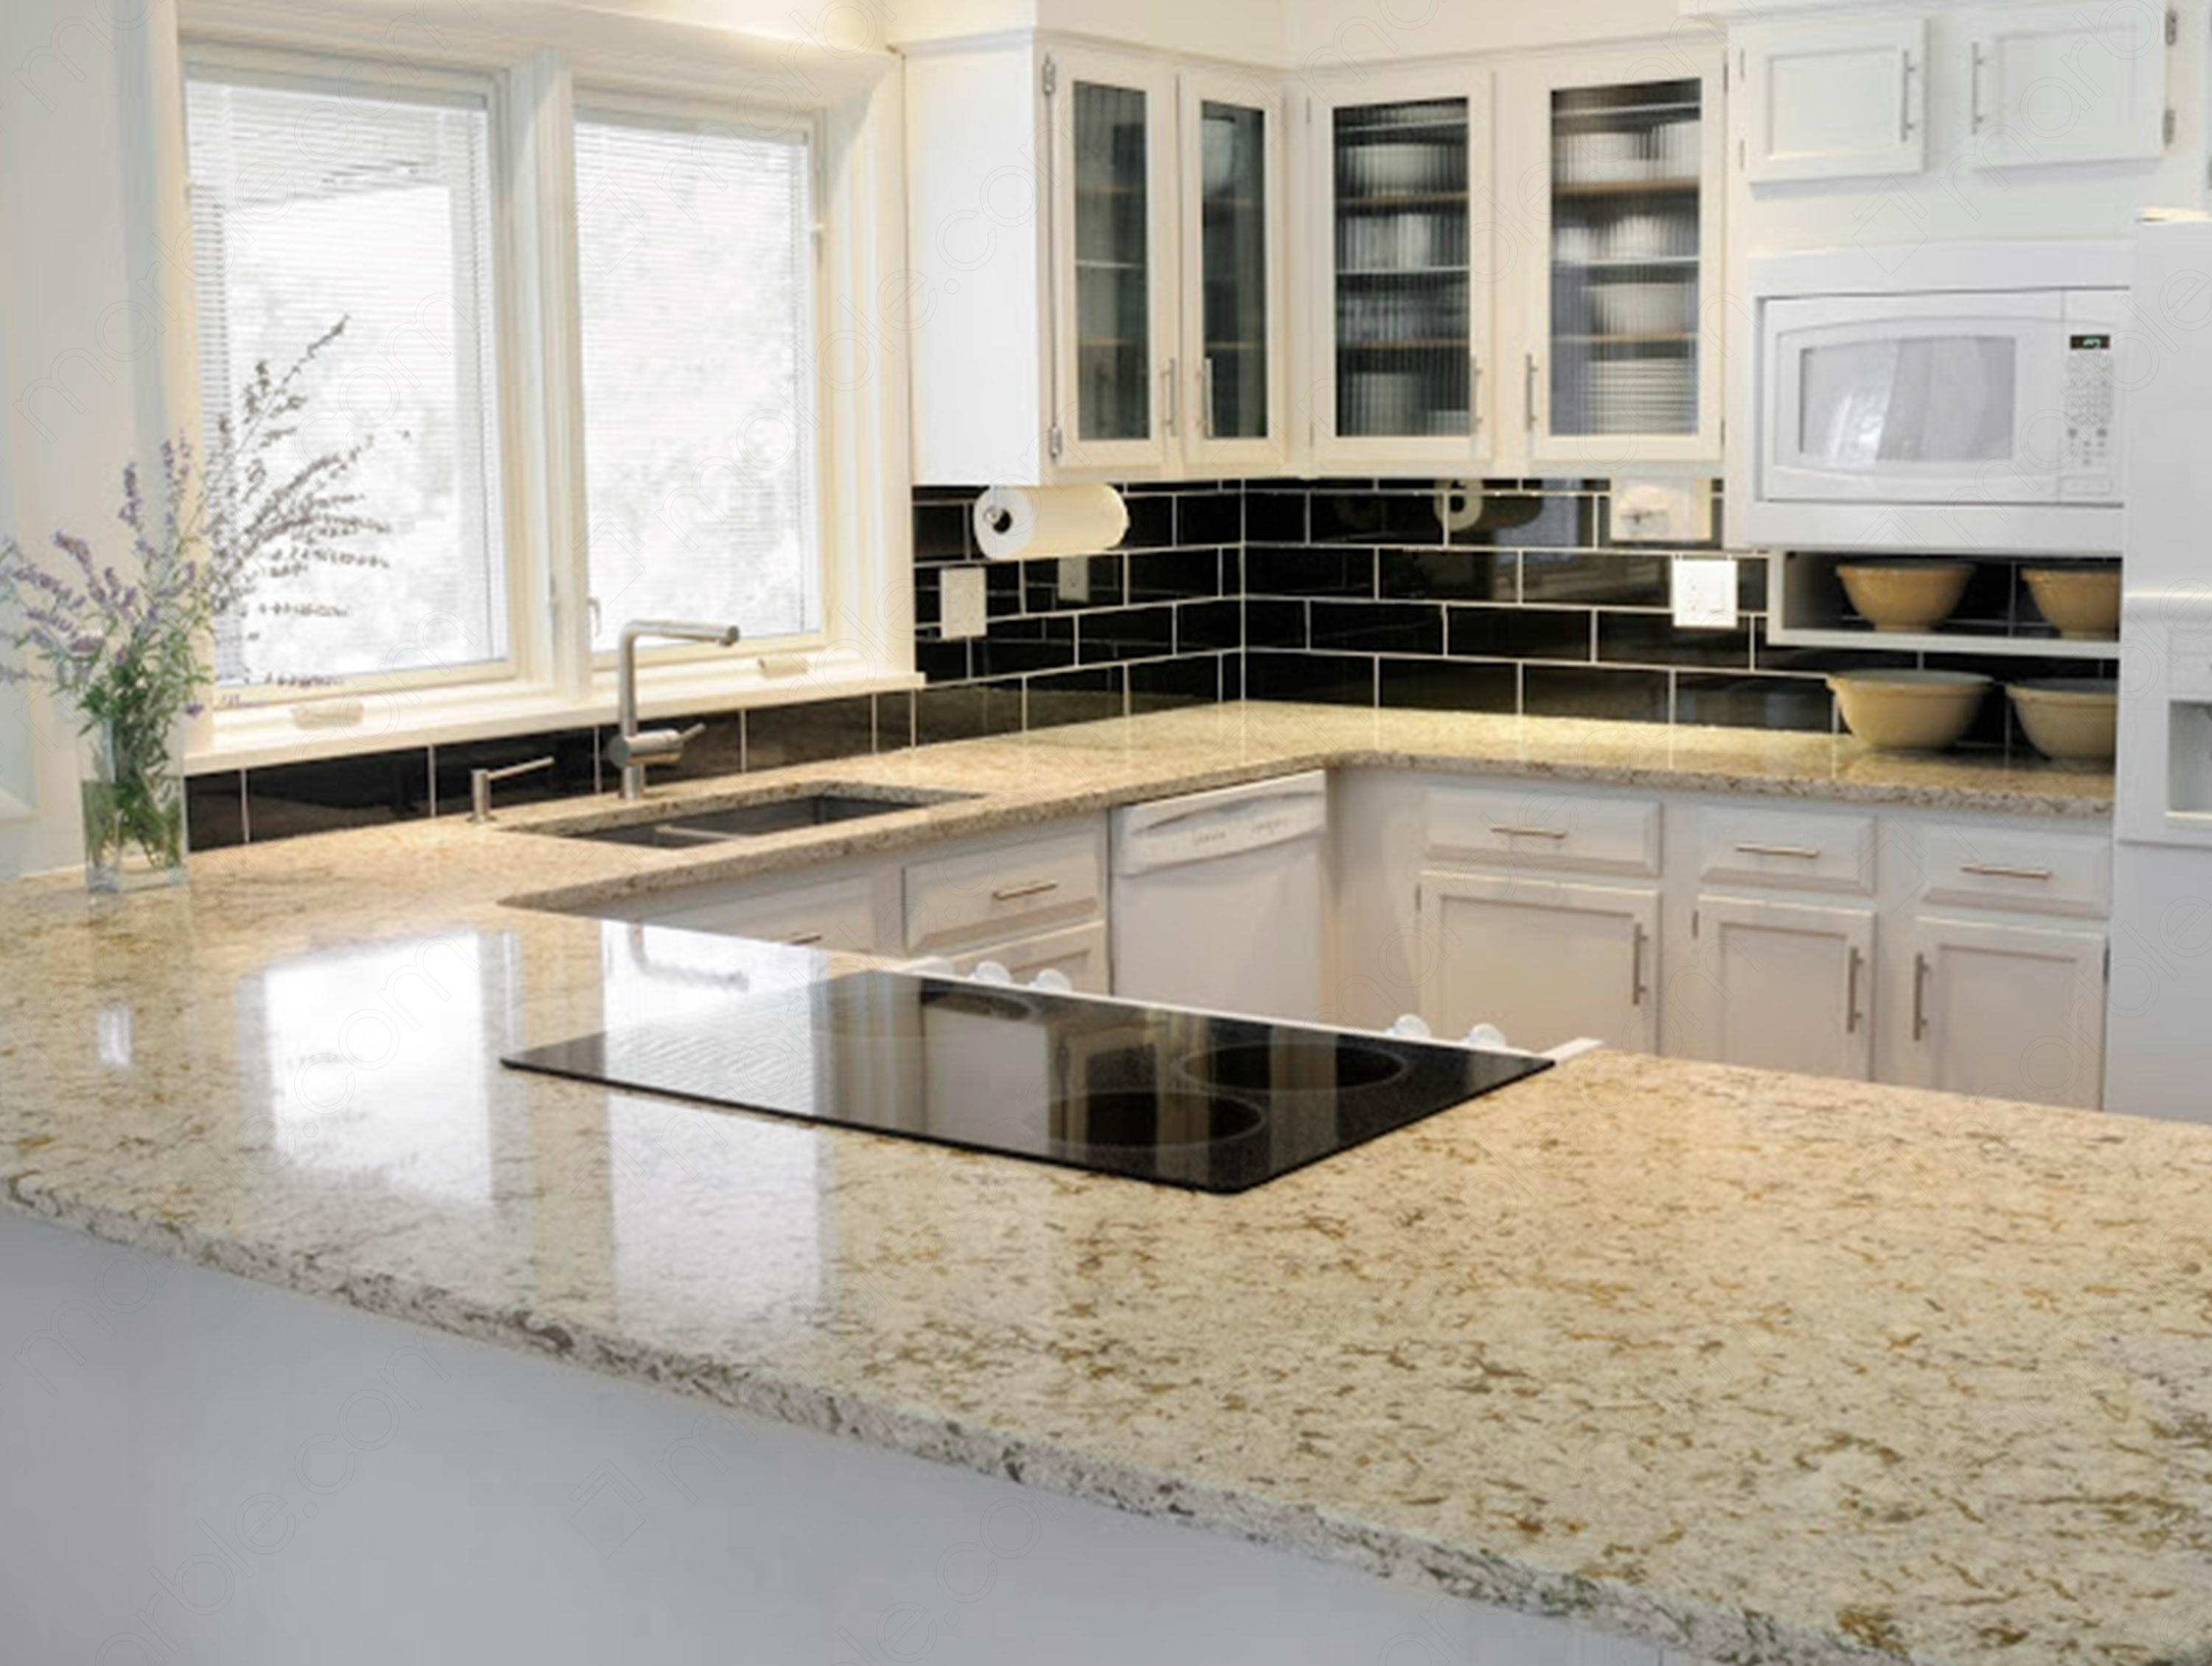 How To Make Granite Seams Disappear, How To Fill A Seam In Granite Countertop